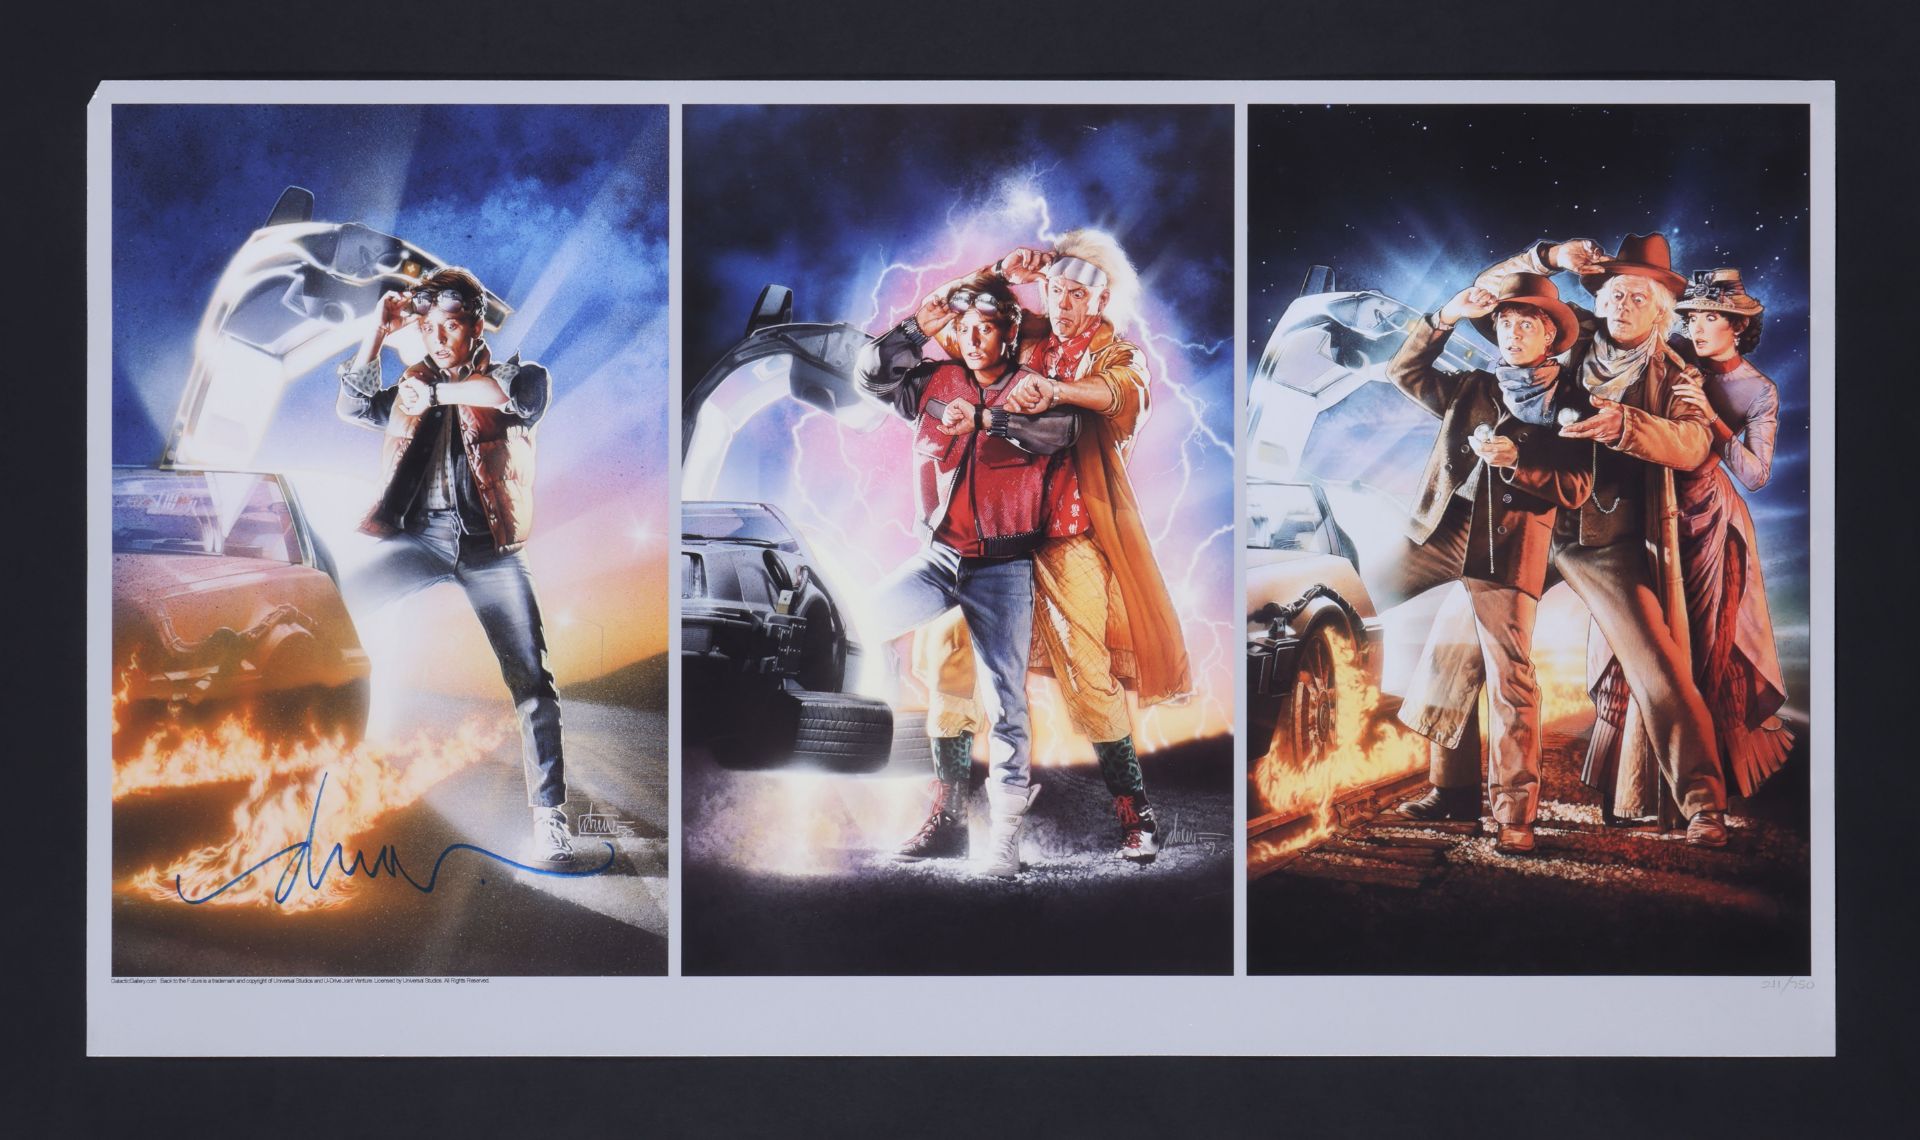 BACK TO THE FUTURE TRILOGY (1985) - David Frangioni Collection: Drew Struzan Signed and Hand-Numbere